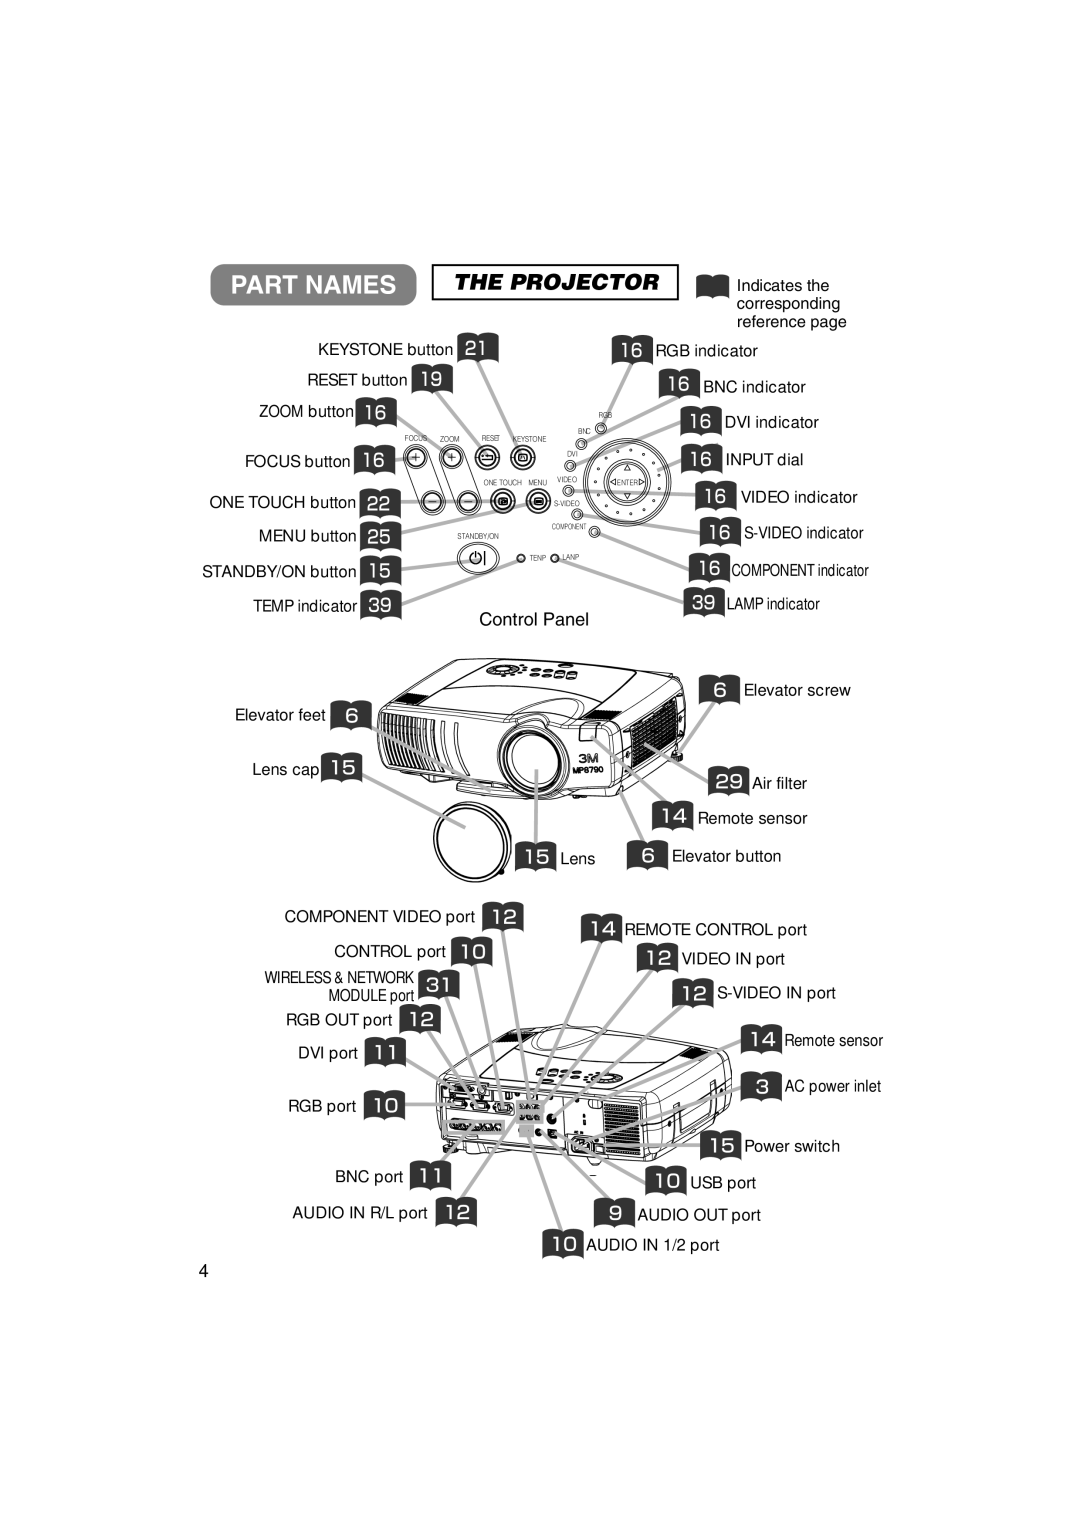 3M MP7650, MP7750 manual Part Names, The Projector, Control Panel 